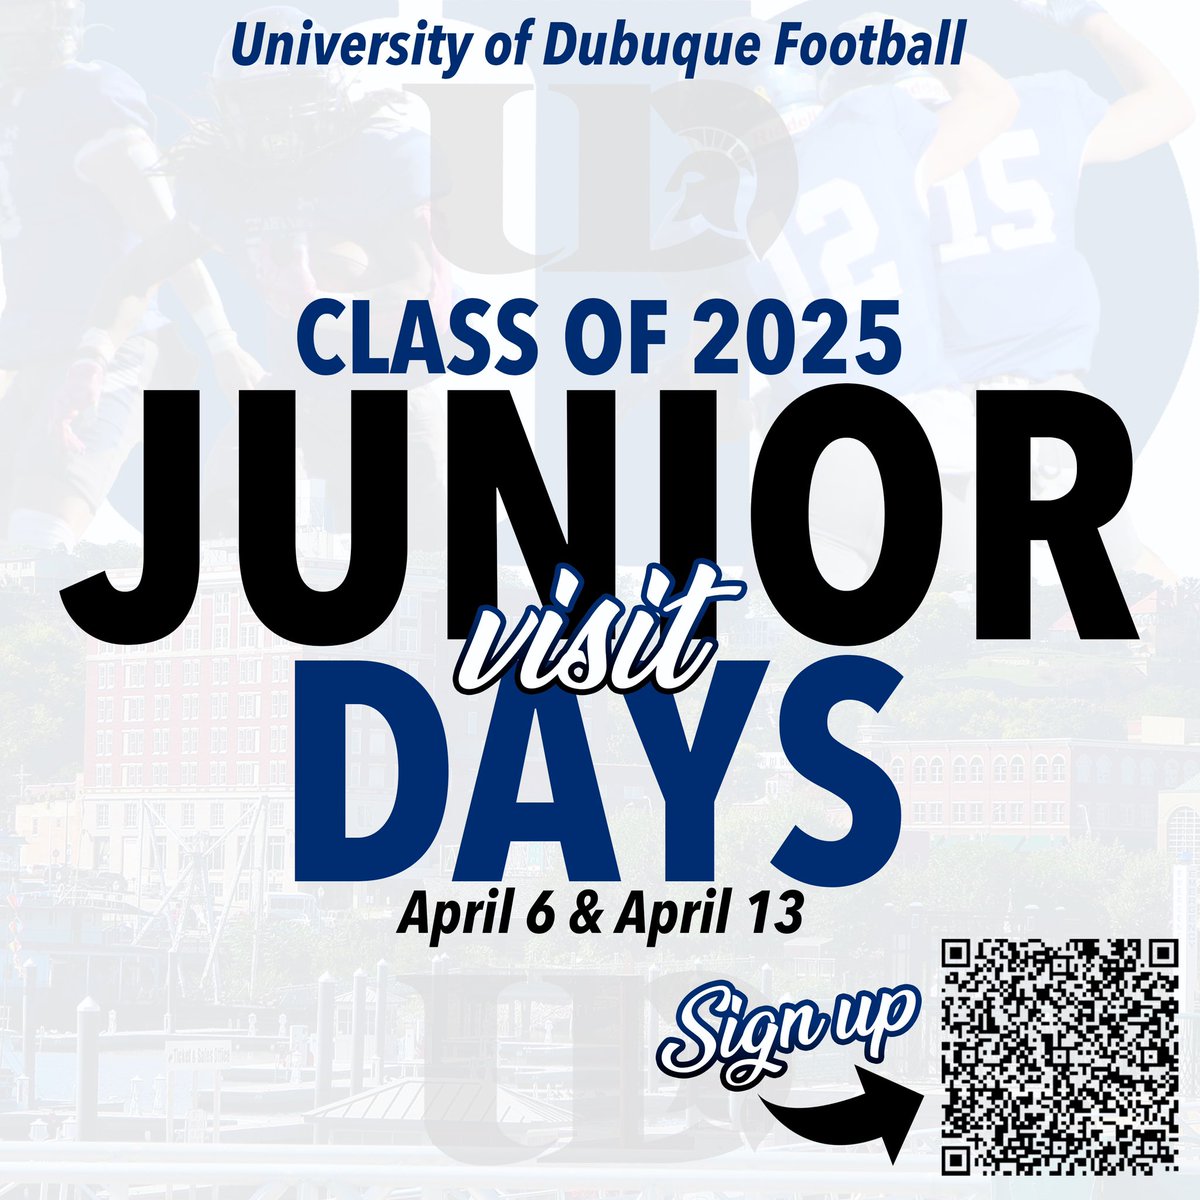 We will be hosting a pair of Junior Day visits for the Class of 2025 April 6th and April 13th. Use the QR Code to sign-up! Come get a first hand look at our football program!